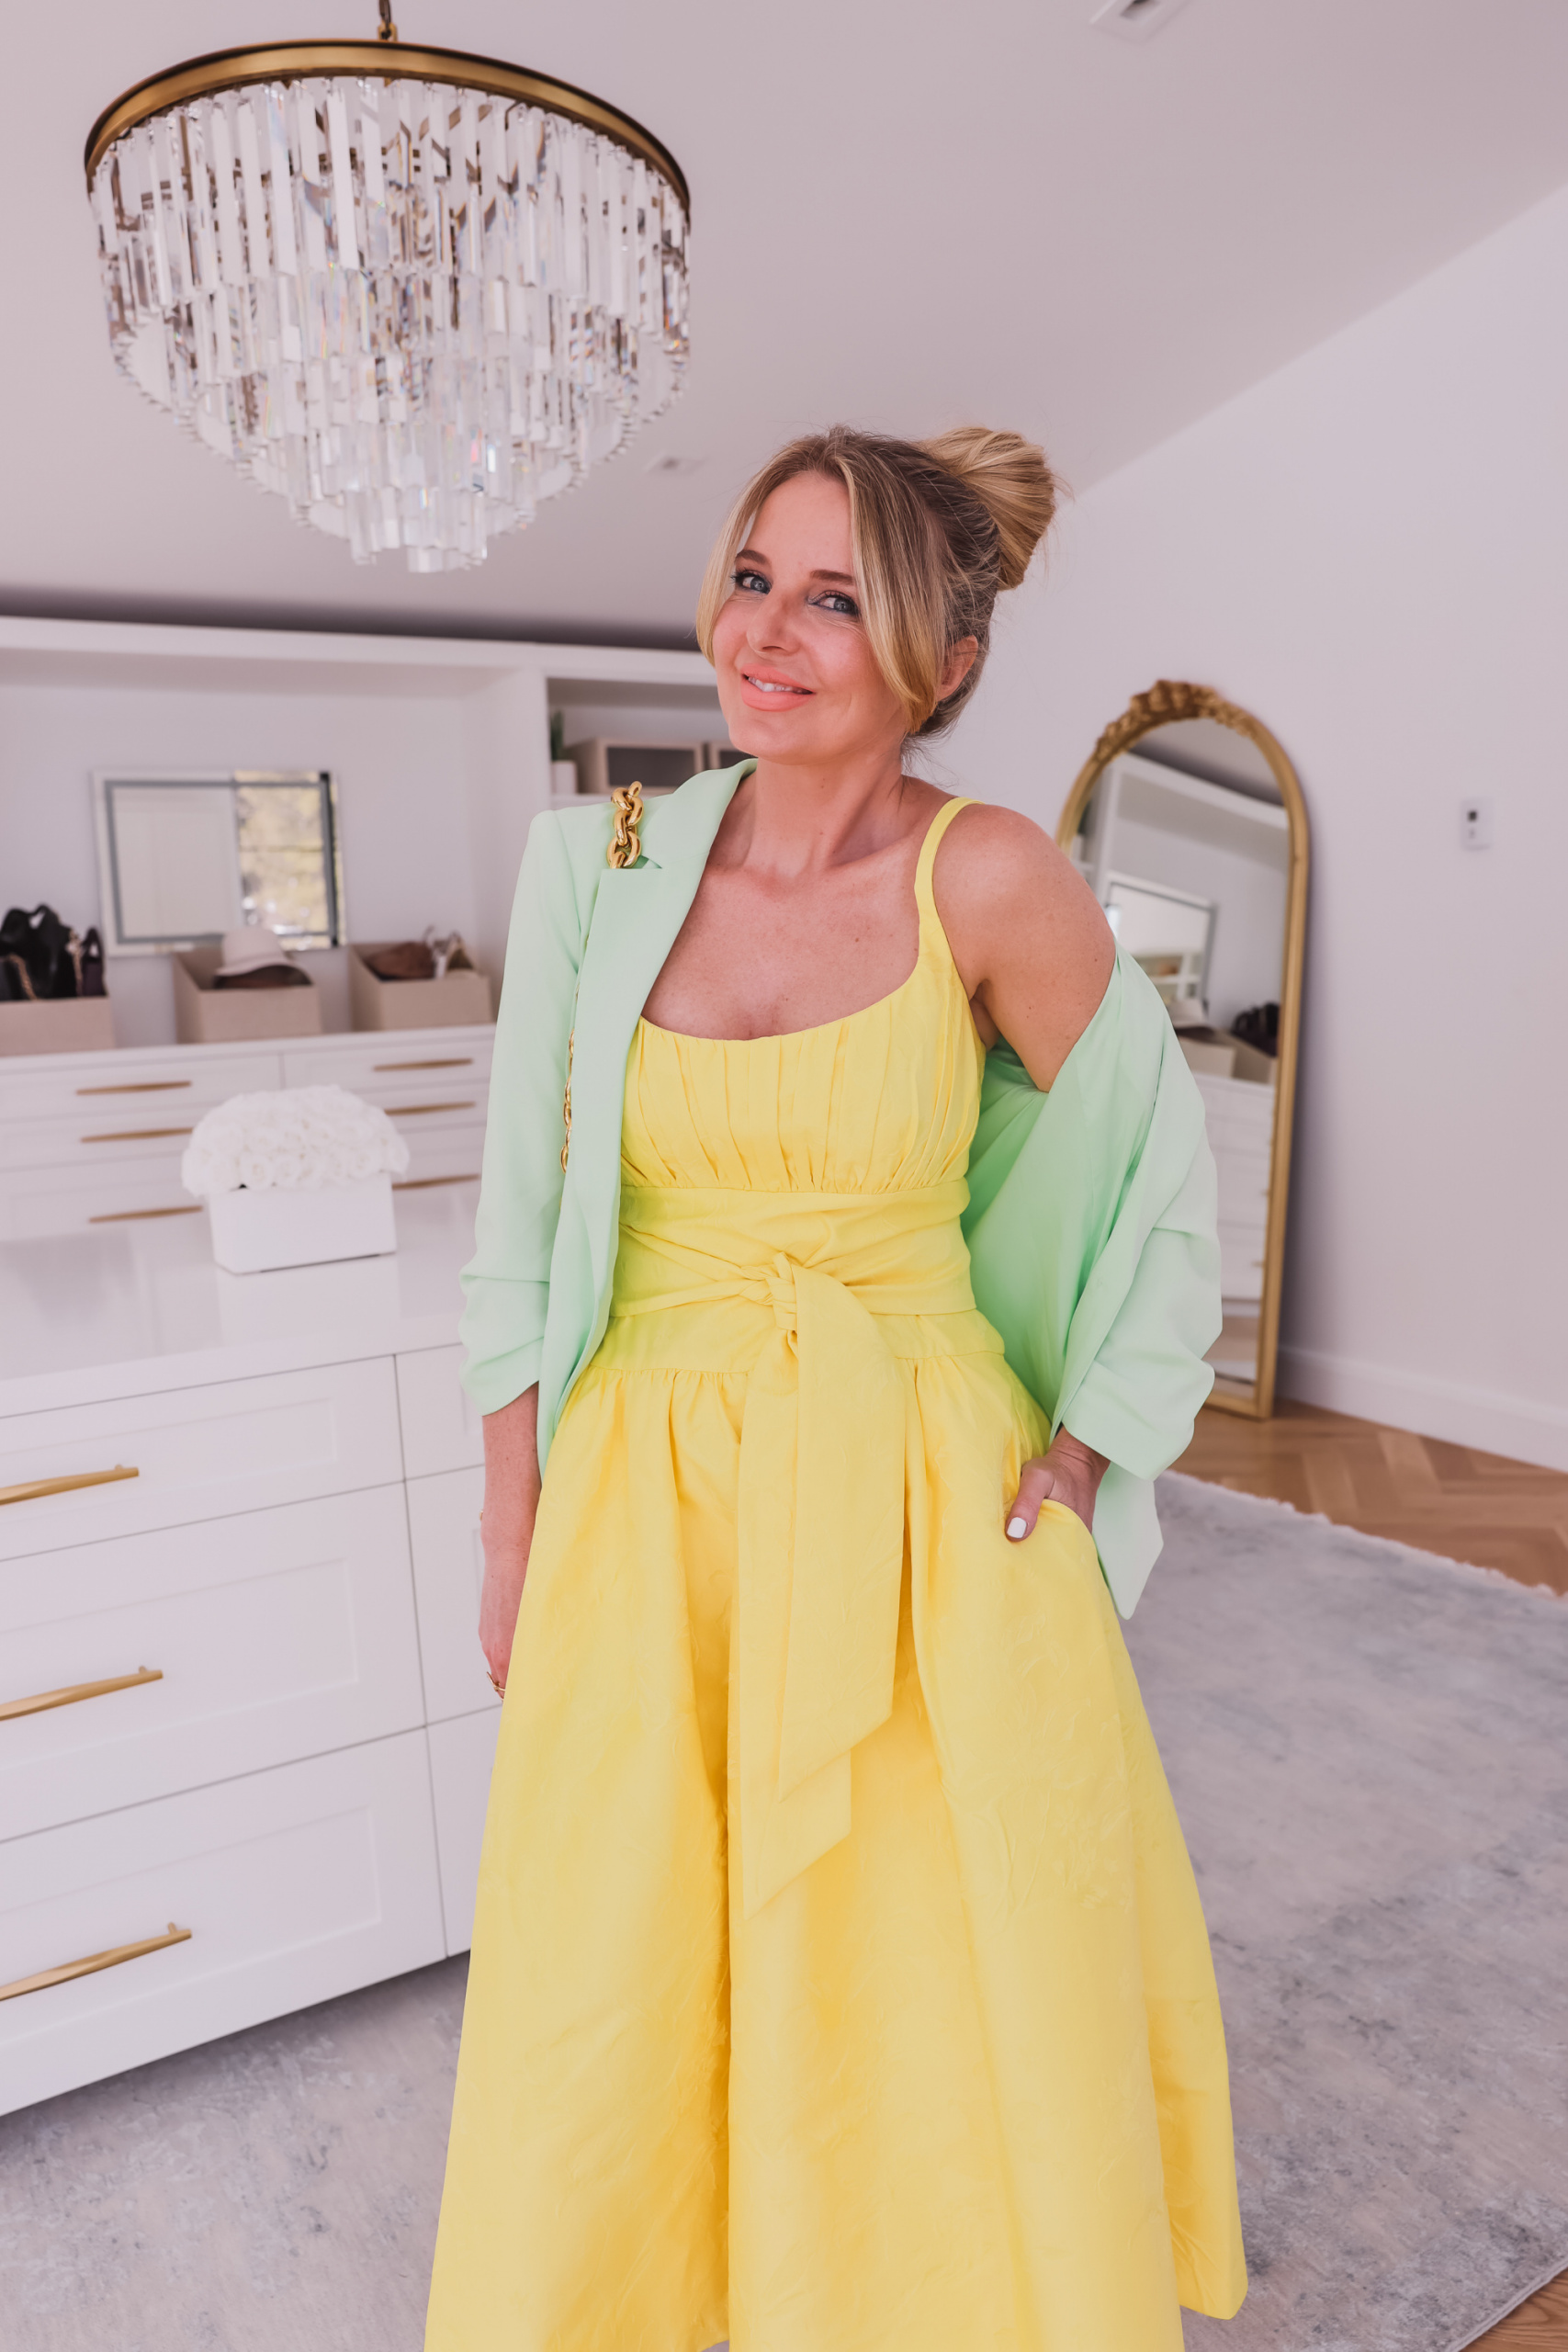 mother's day dresses, best mother's day dresses, mother's day dresses over 40, what to wear on mother's day, erin busbee, busbee style, telluride, colorado, yellow monique Lhuillier midi dress, cinq a sept mint green blazer, white bottega veneta chain cassette bag, mach & mach crystal bow heels